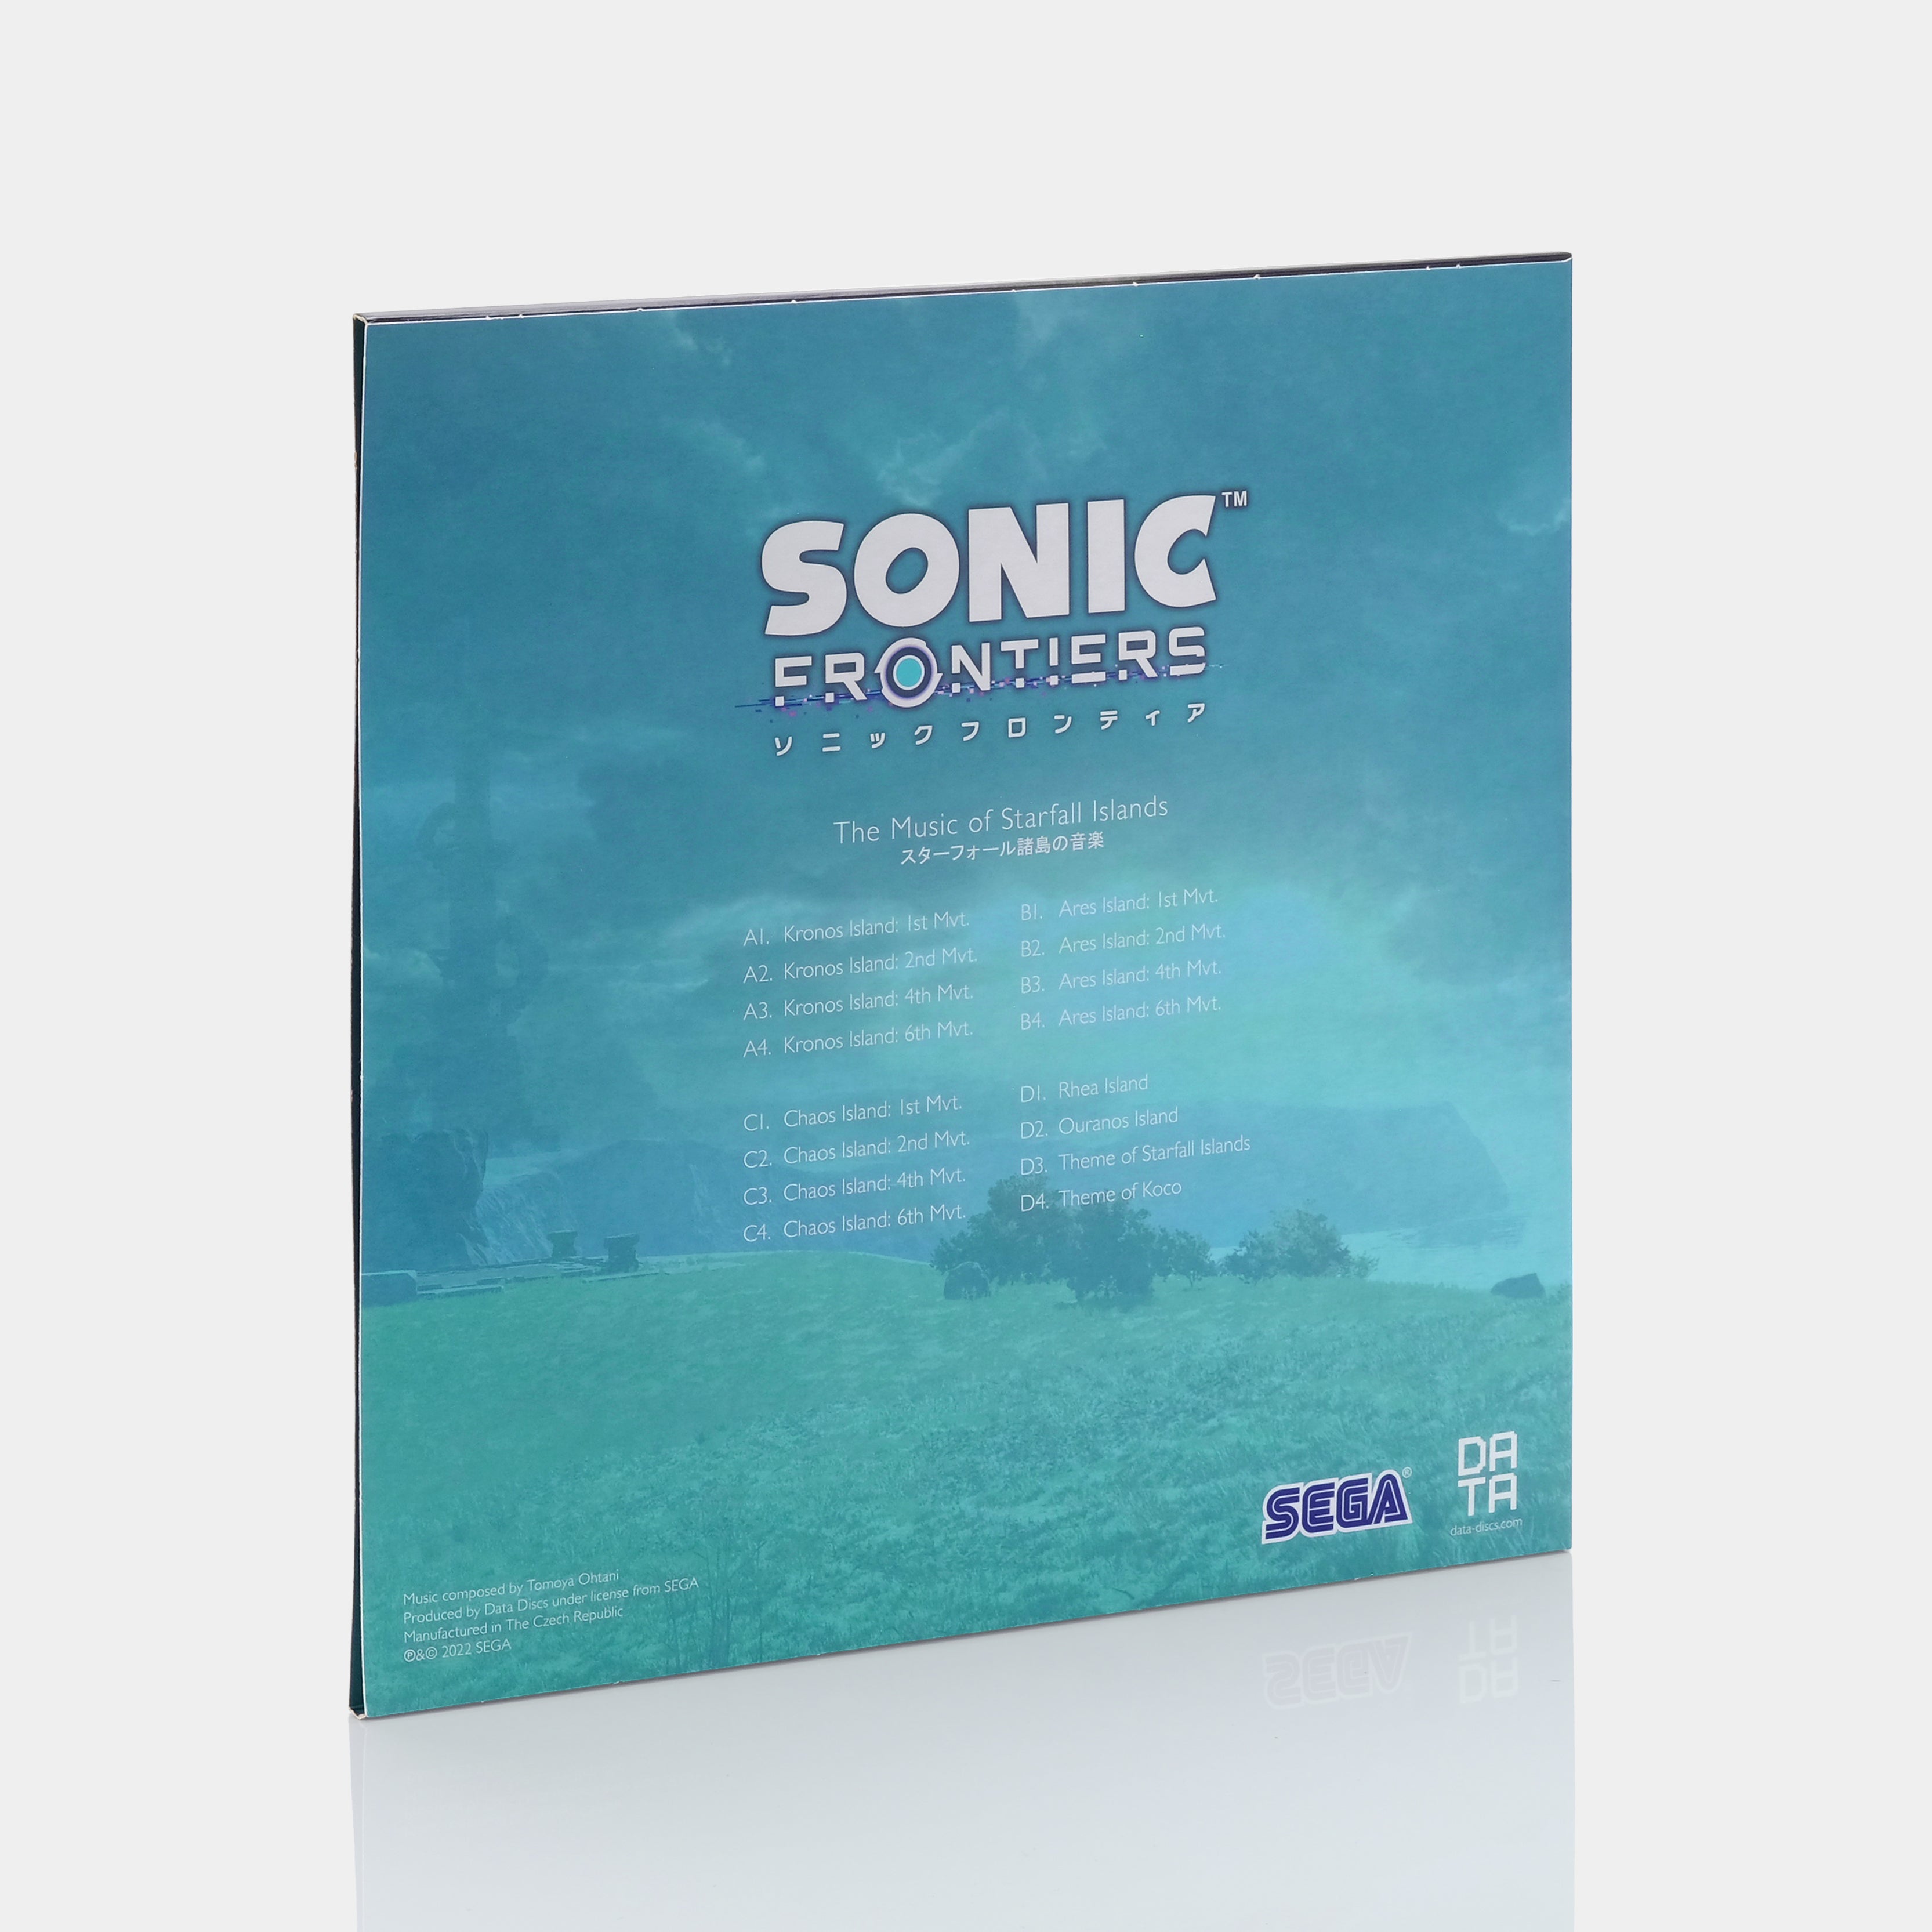 Tomoya Ohtani - Sonic Frontiers: The Music of Starfall Islands 2xLP Blue Vinyl Record